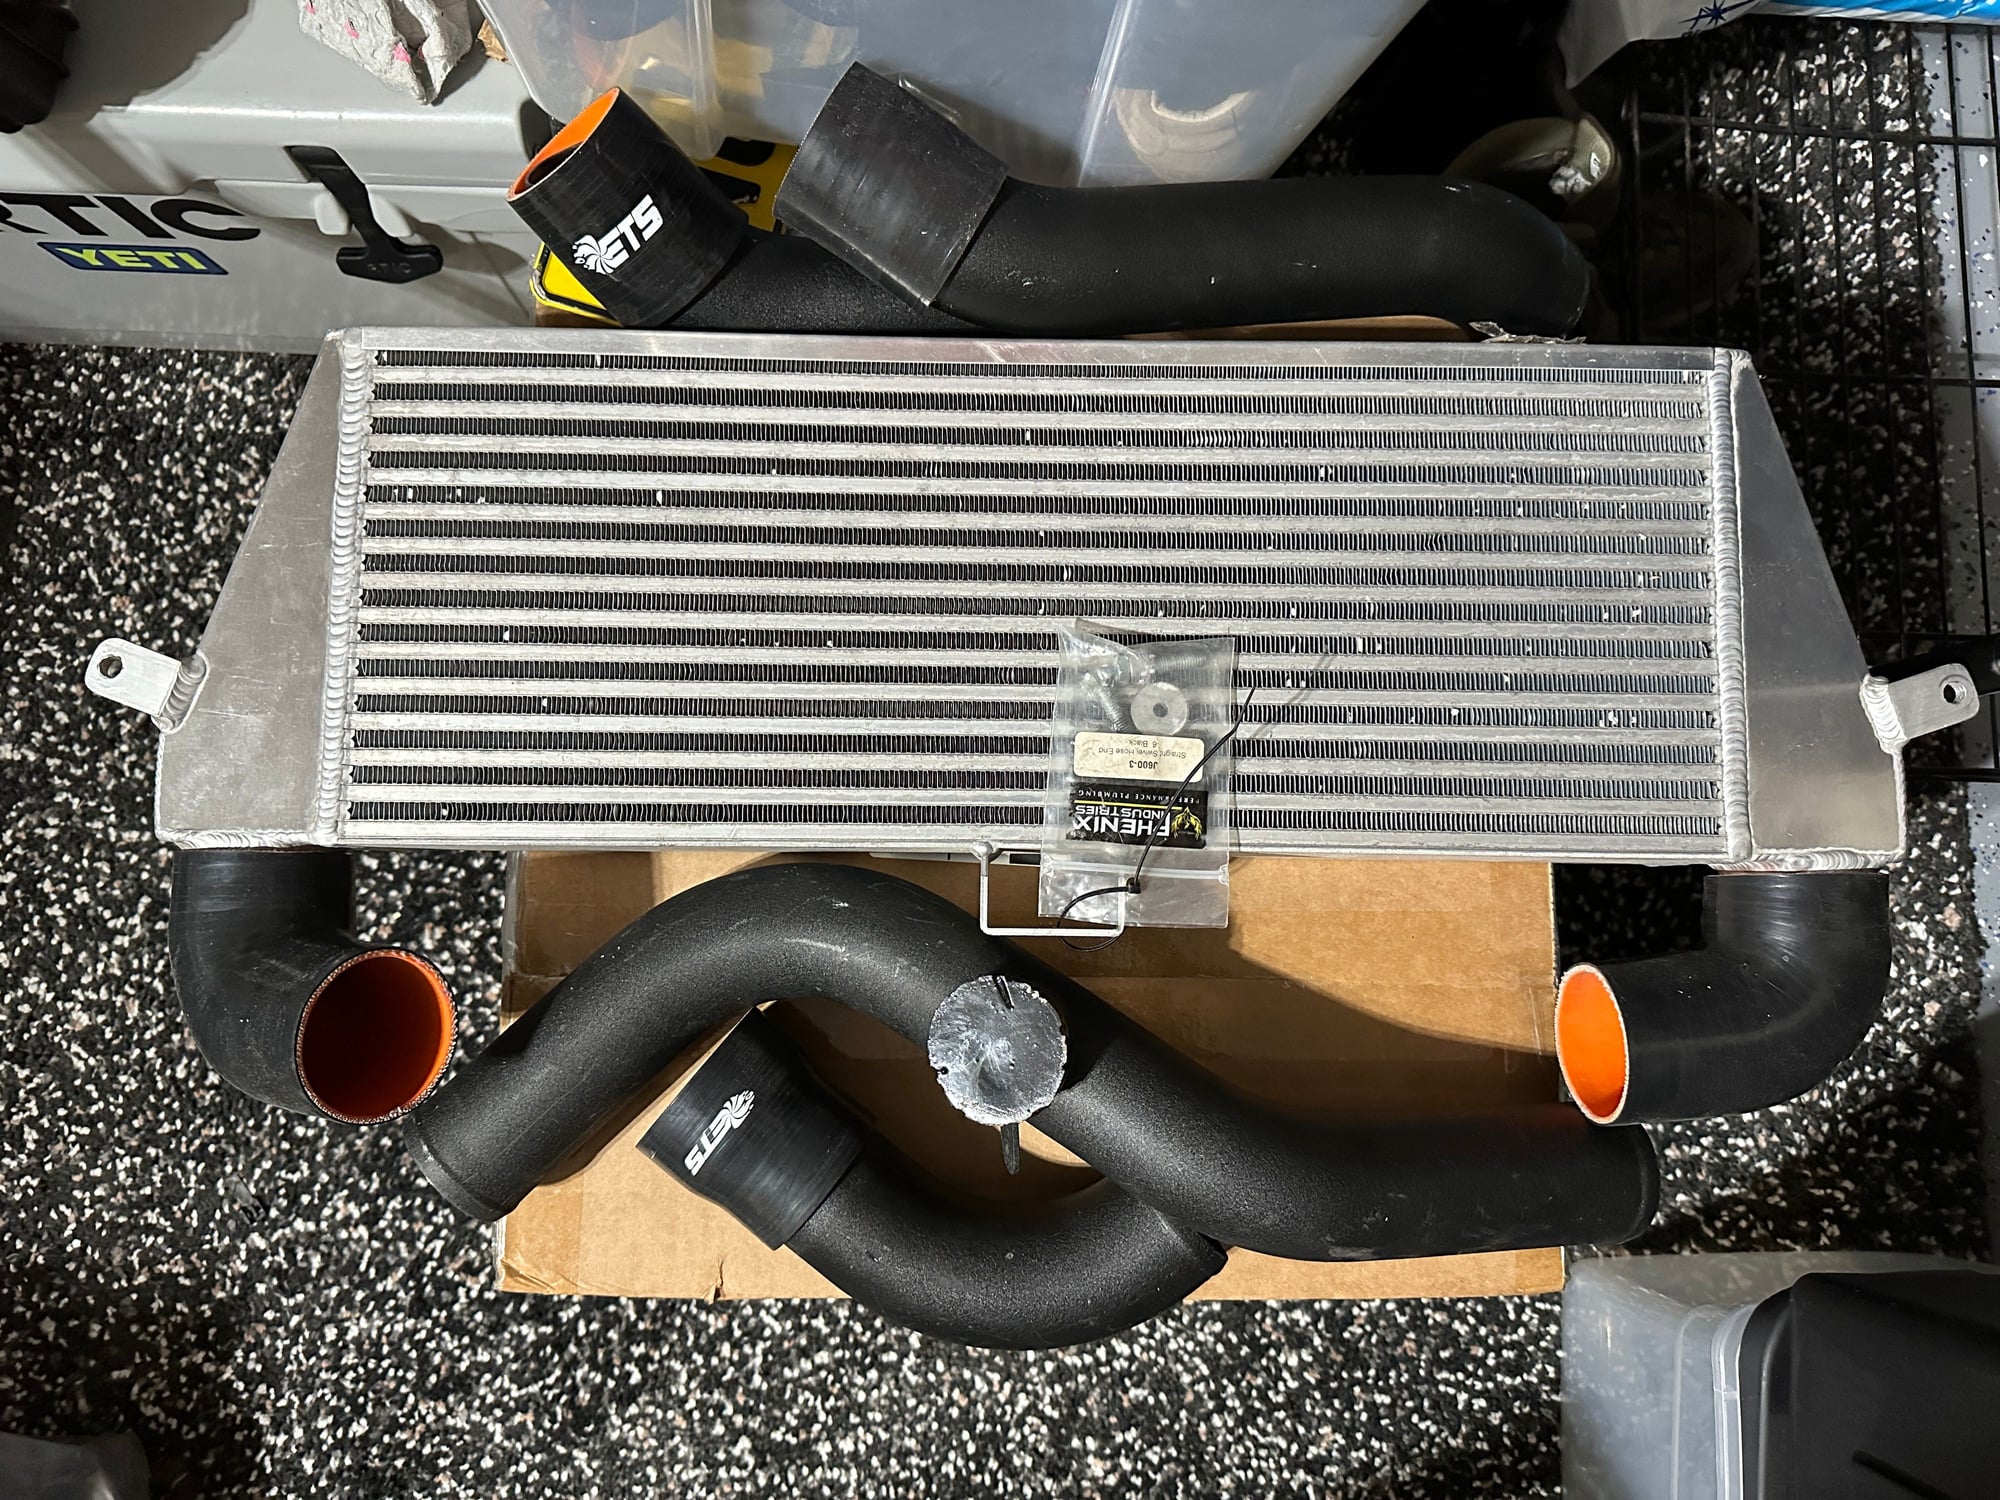 Engine - Intake/Fuel - WTS/WTT: Extreme Turbo Systems Intercooler Kit FD - Used - 1993 to 2002 Mazda RX-7 - San Antonio, TX 78253, United States